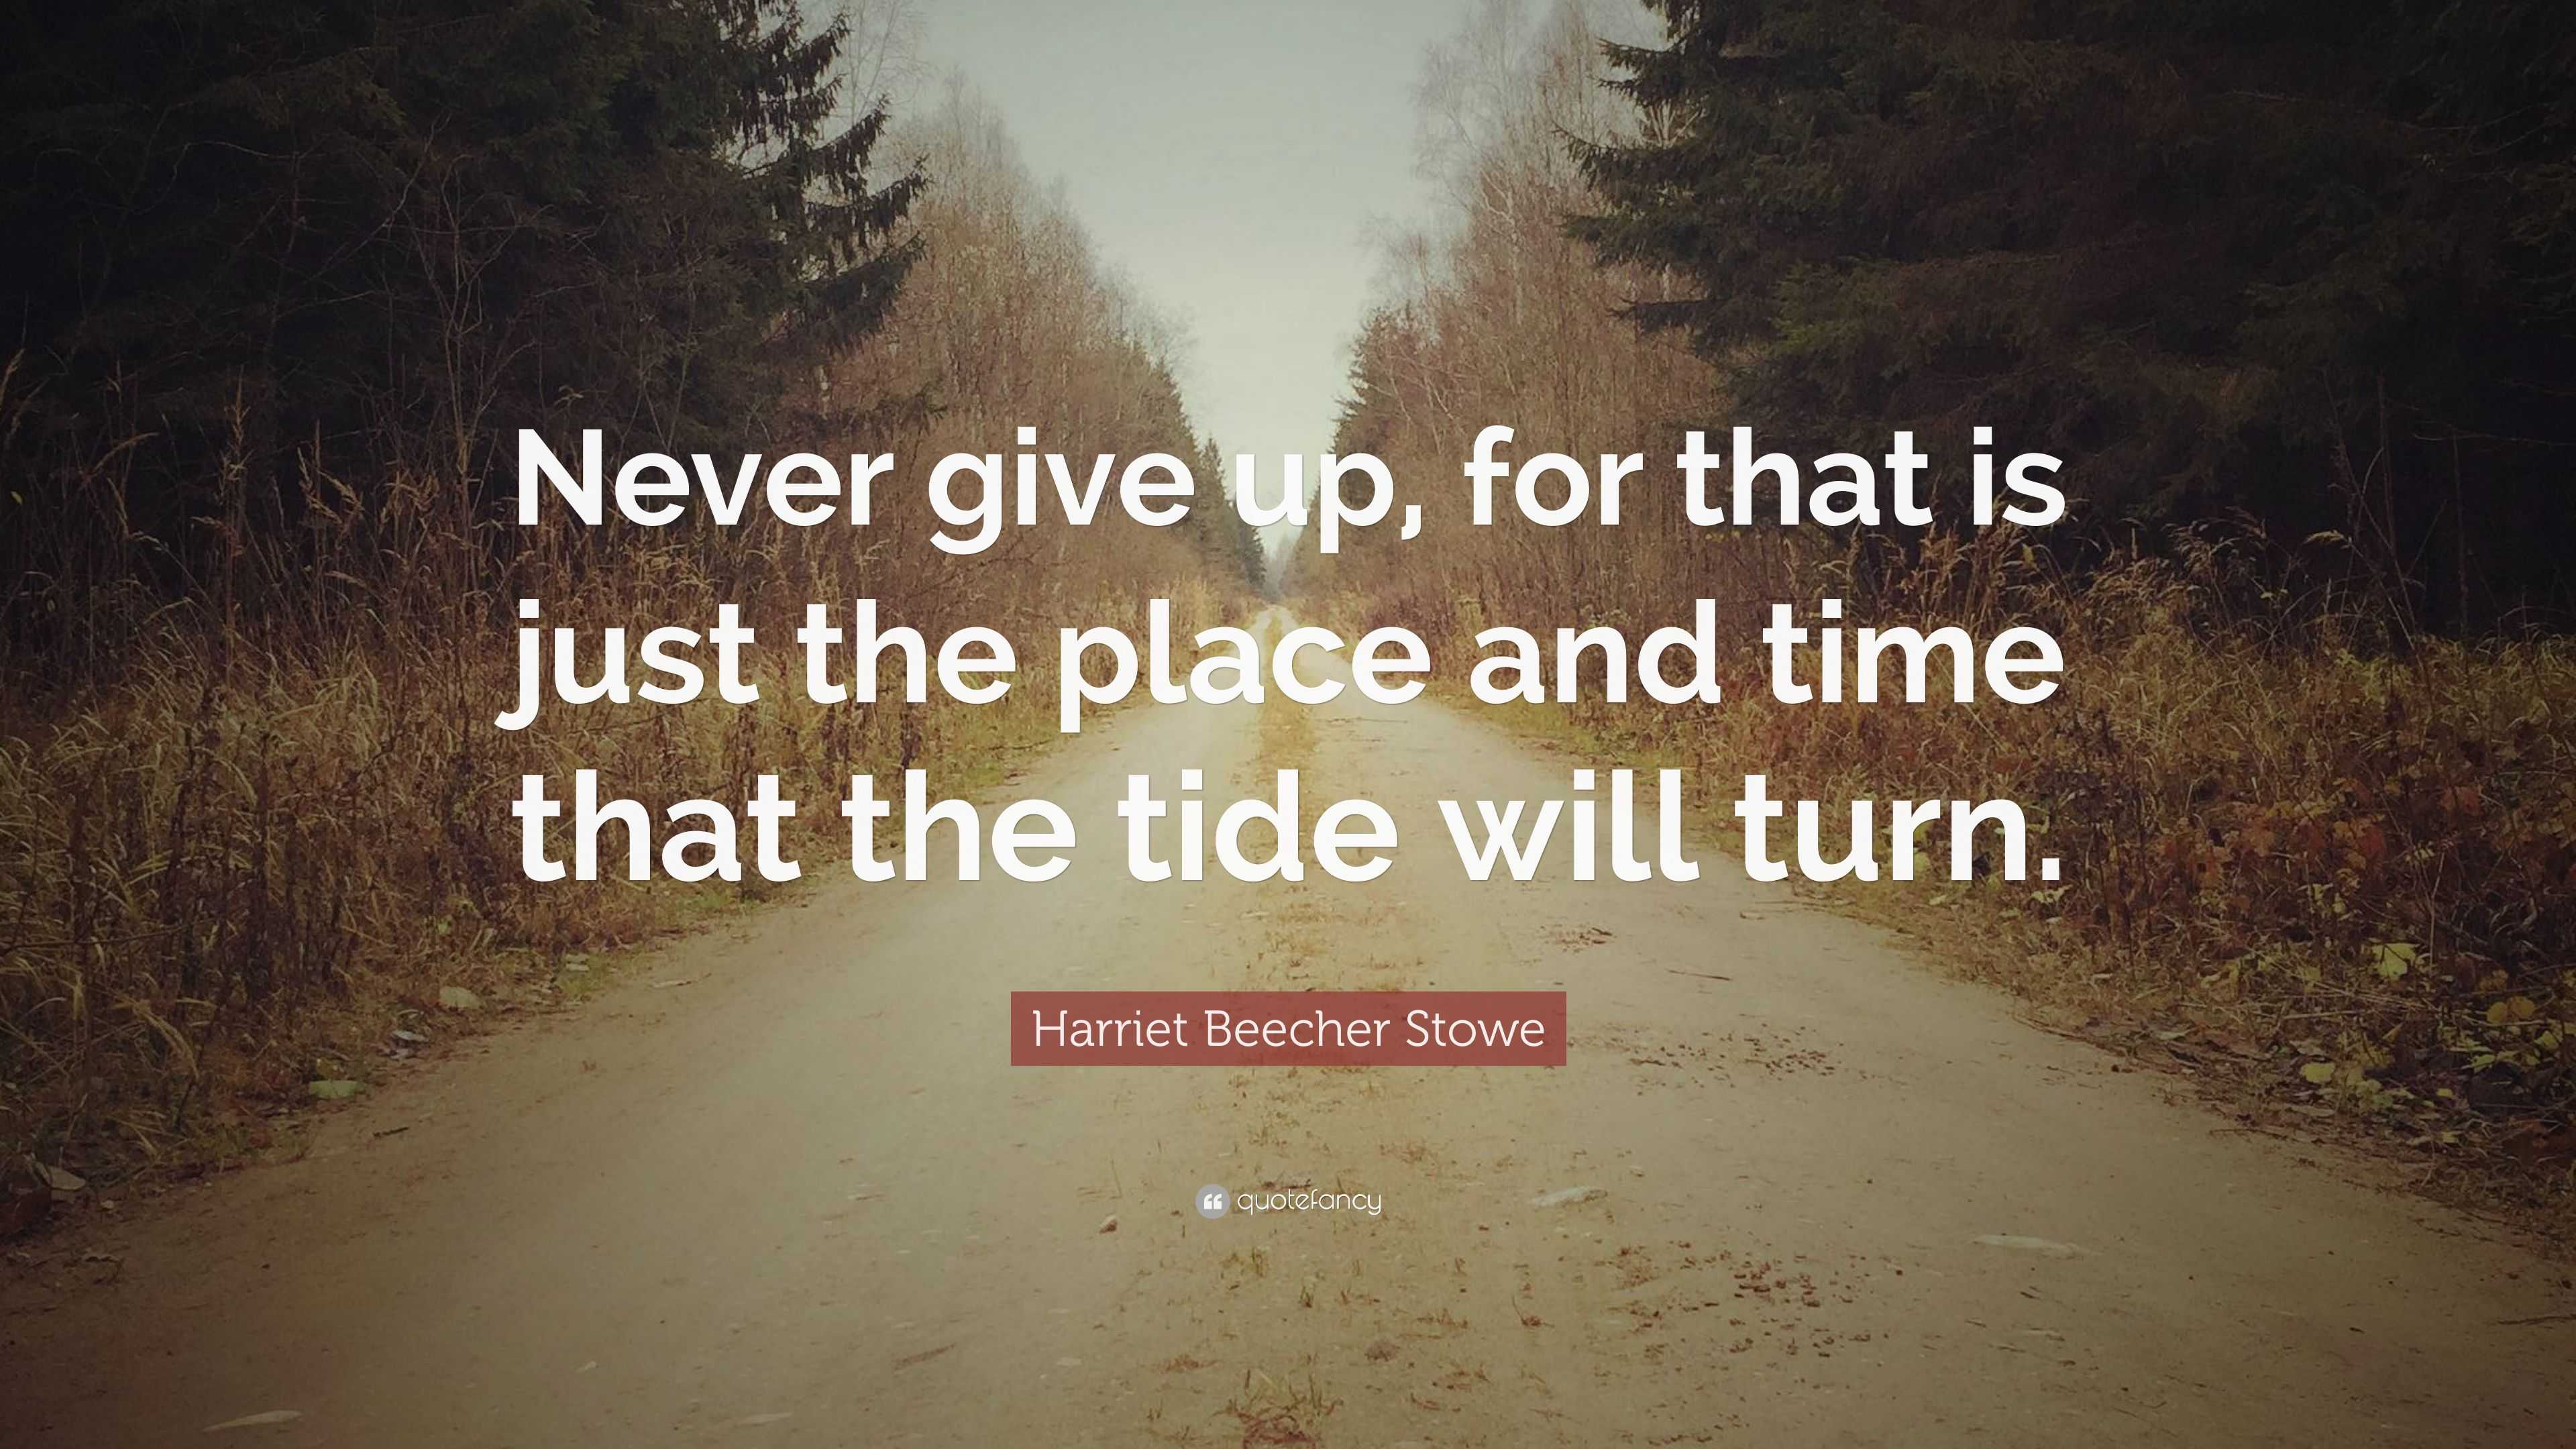 Harriet Beecher Stowe Quote “Never give up for that is just the place